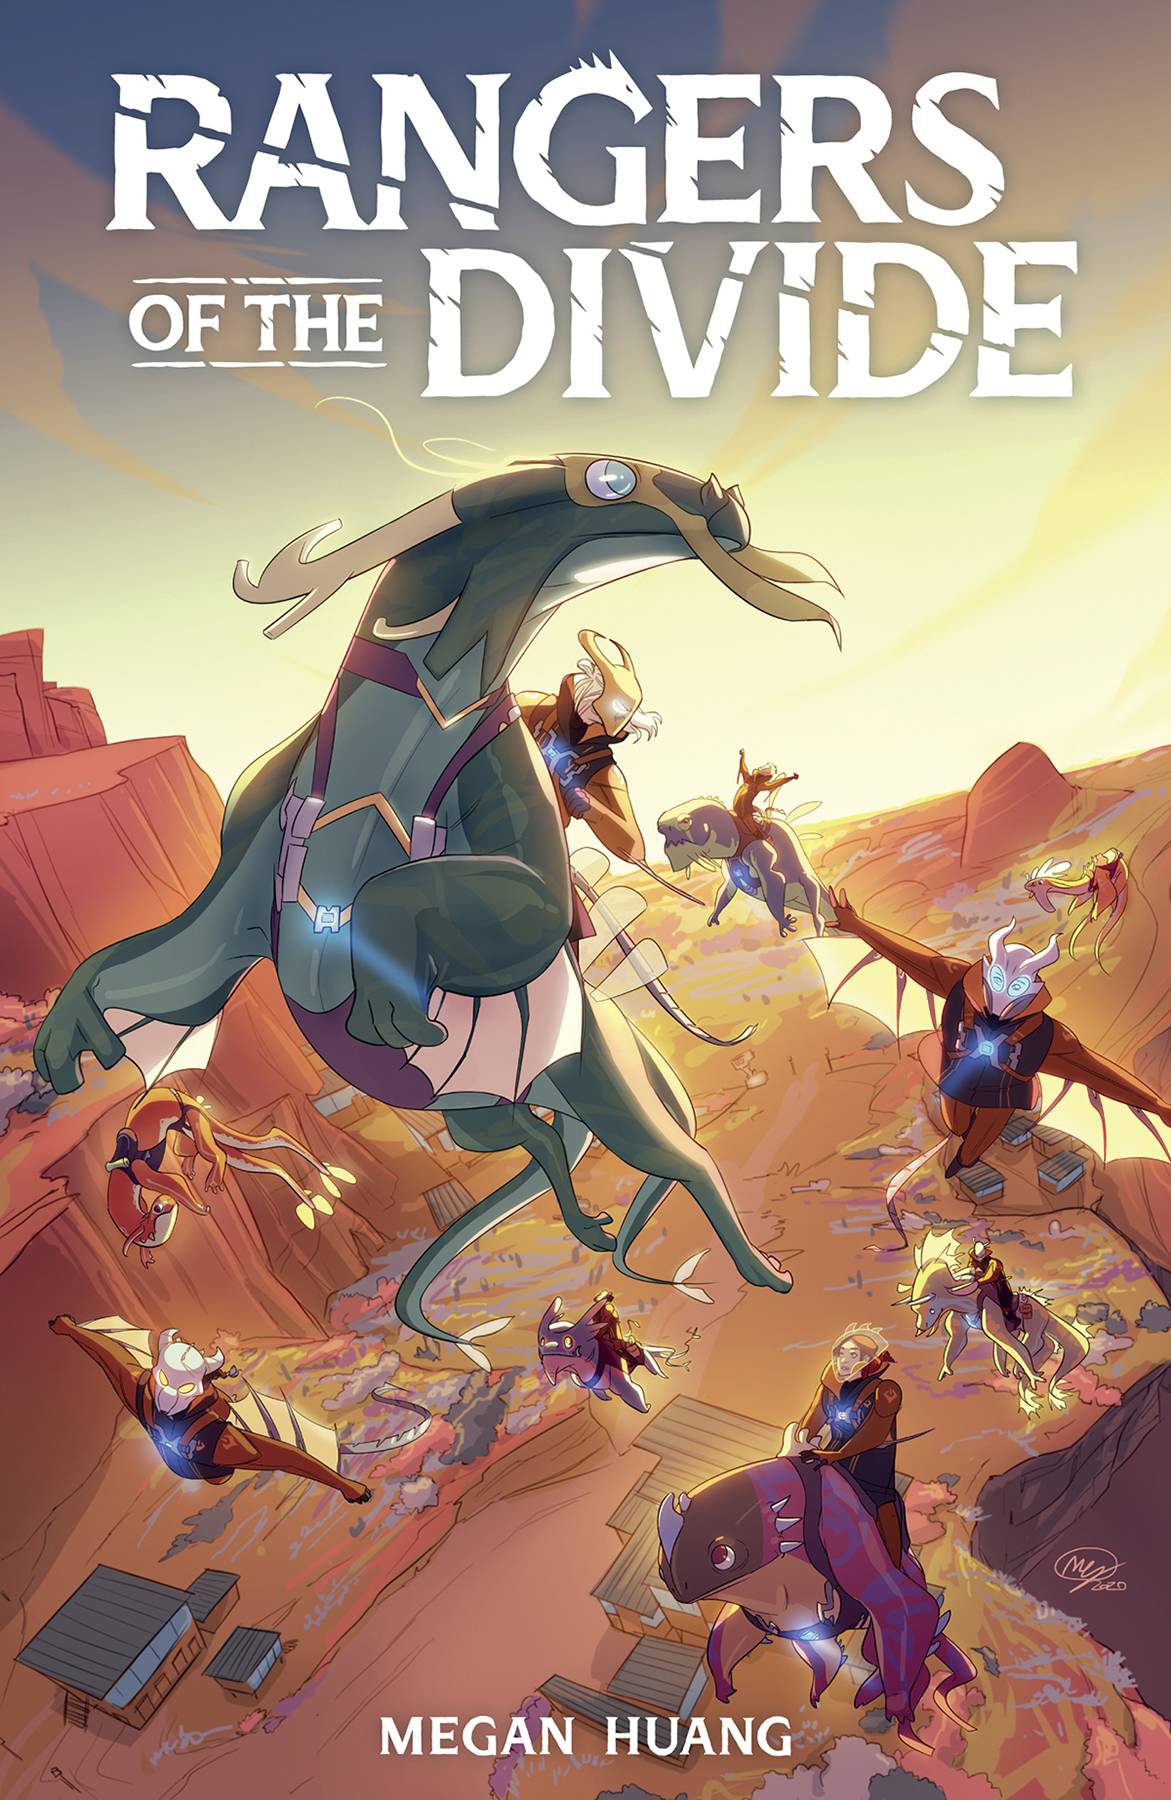 RANGERS OF THE DIVIDE TP (AUG210341)